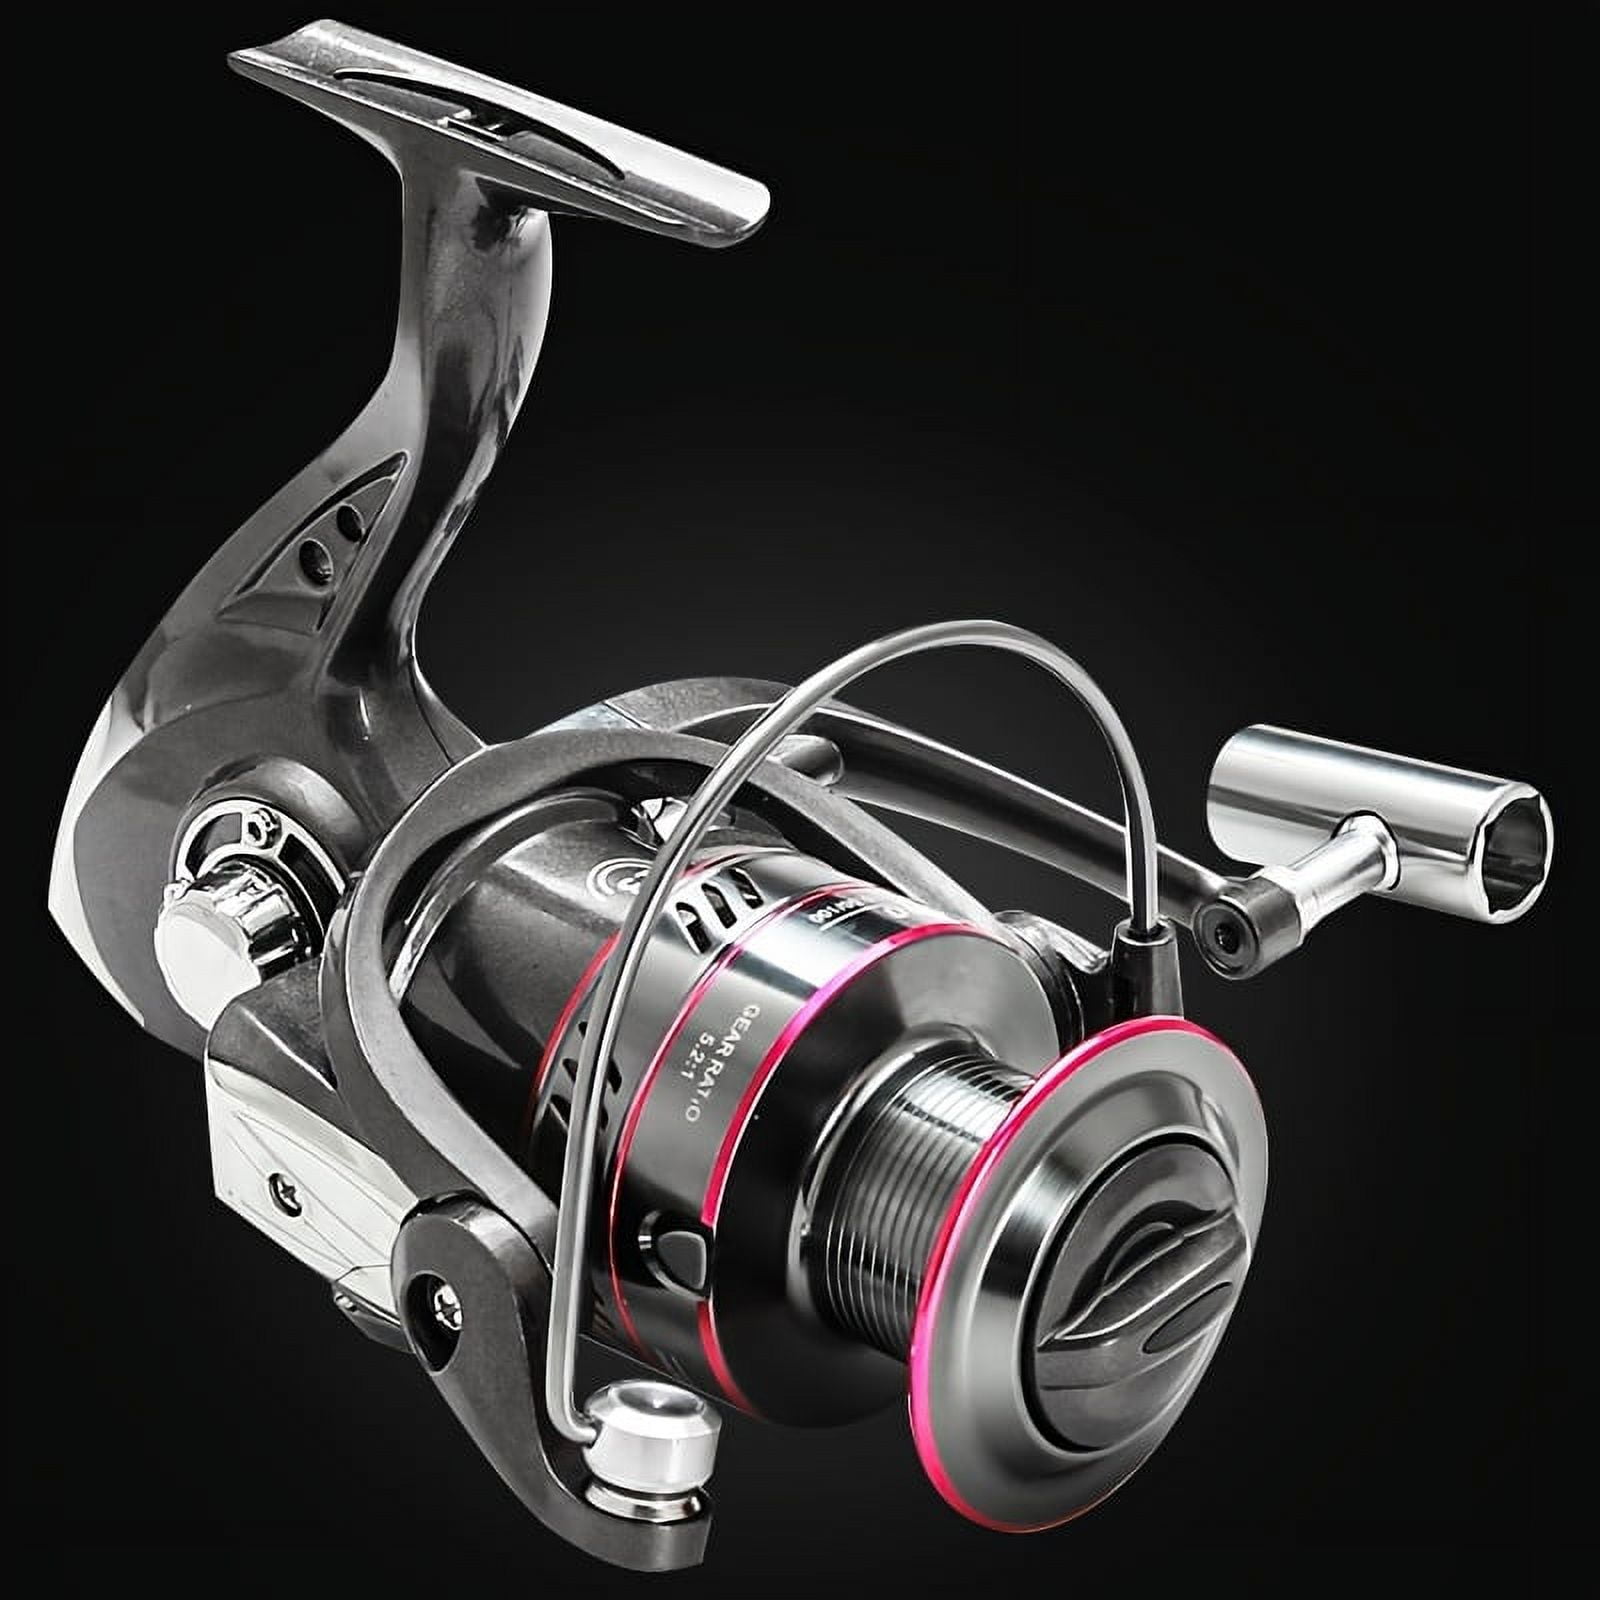 Eagle Claw GUN-50 Gunnison Spinning Reel, Size 50, 5.1: Gear Ratio, 7+1  Bearings : Spinning Fishing Reels : Sports & Outdoors 